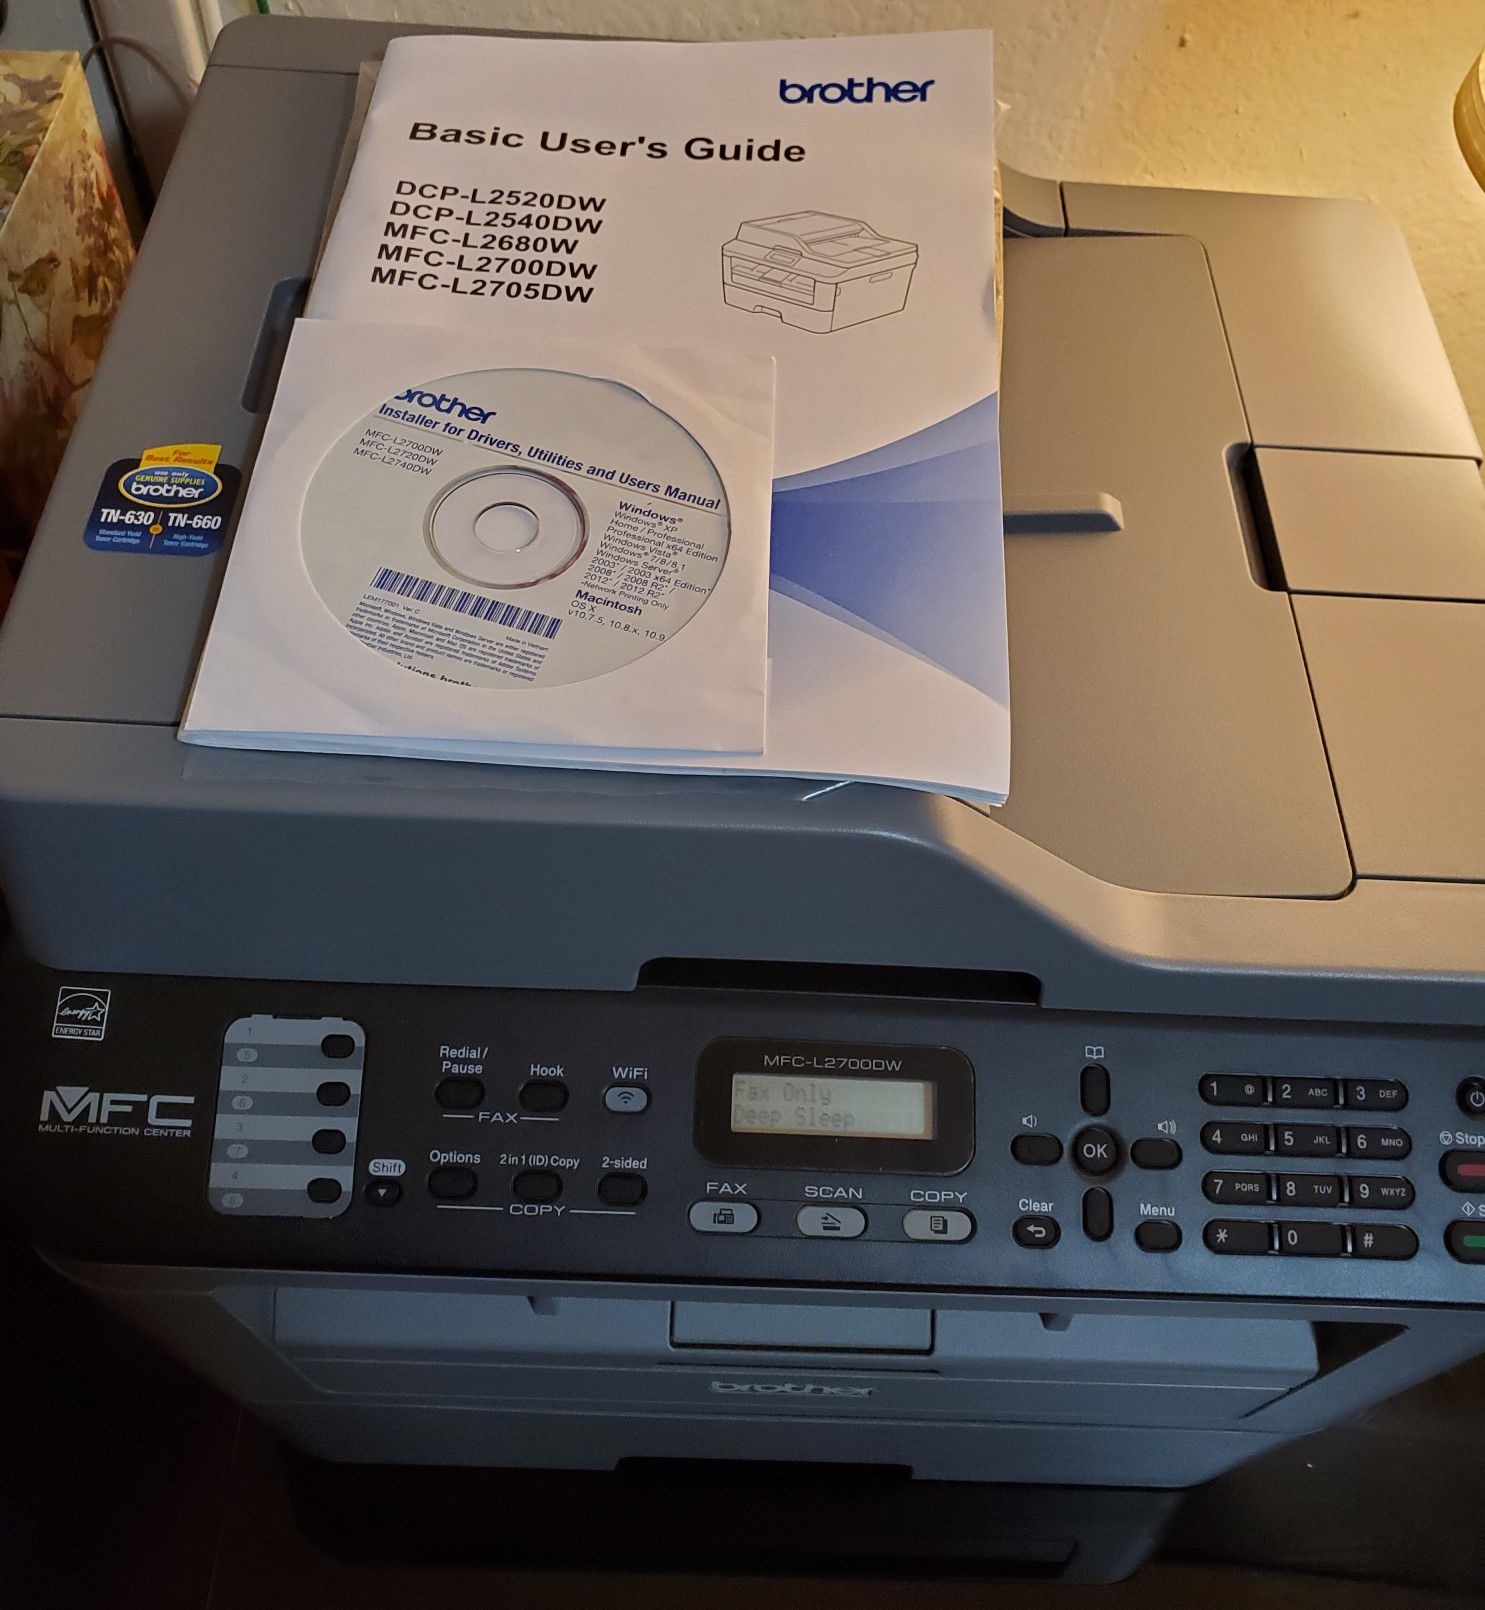 Brother Printer. Fax, Scan and Copy.